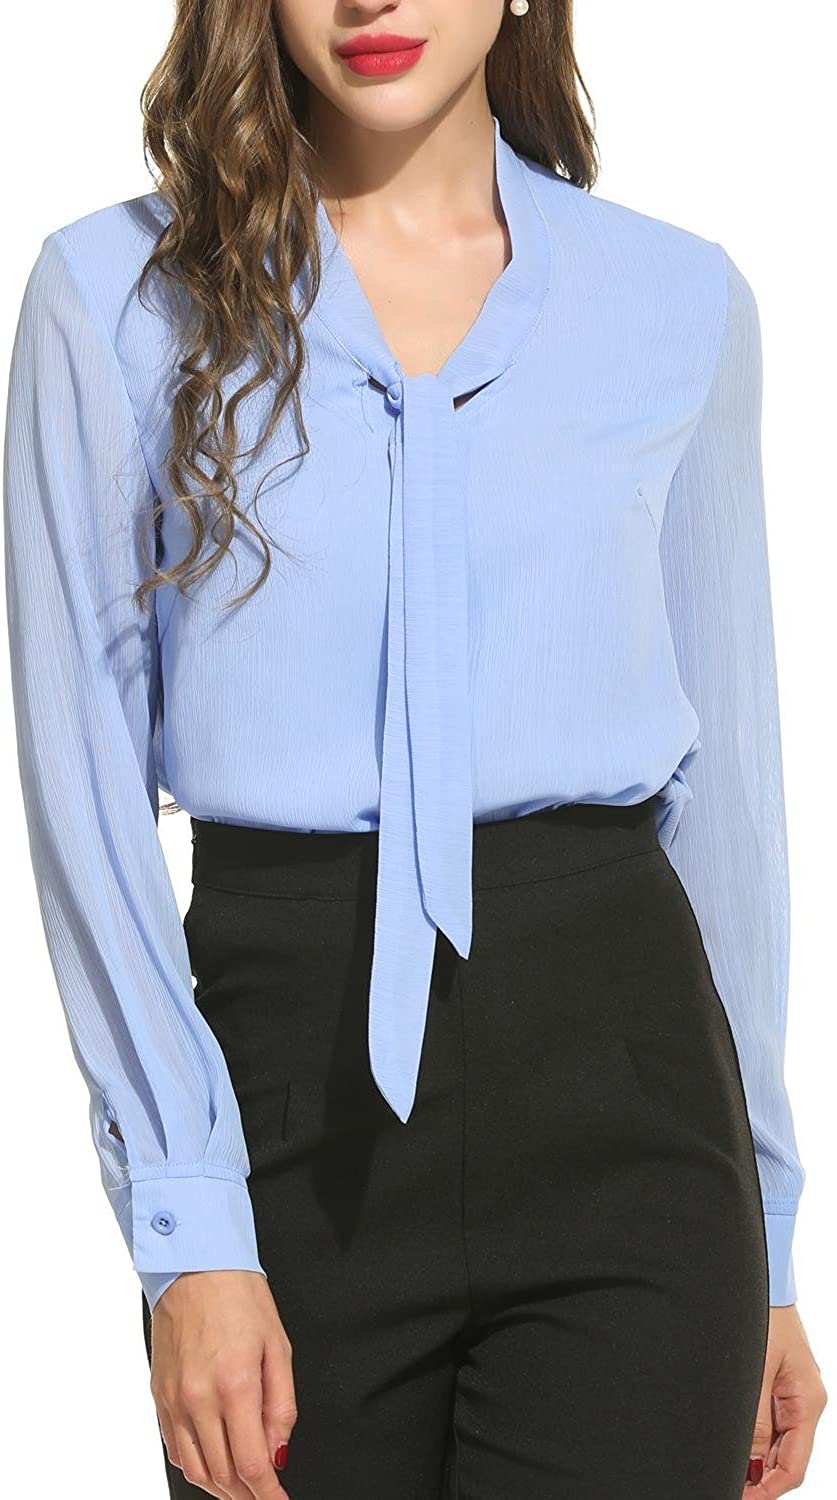 Basic Model Bow Tie Neck Blouse for Women Long Sleeve Casual Shirts Office Work Blouse 